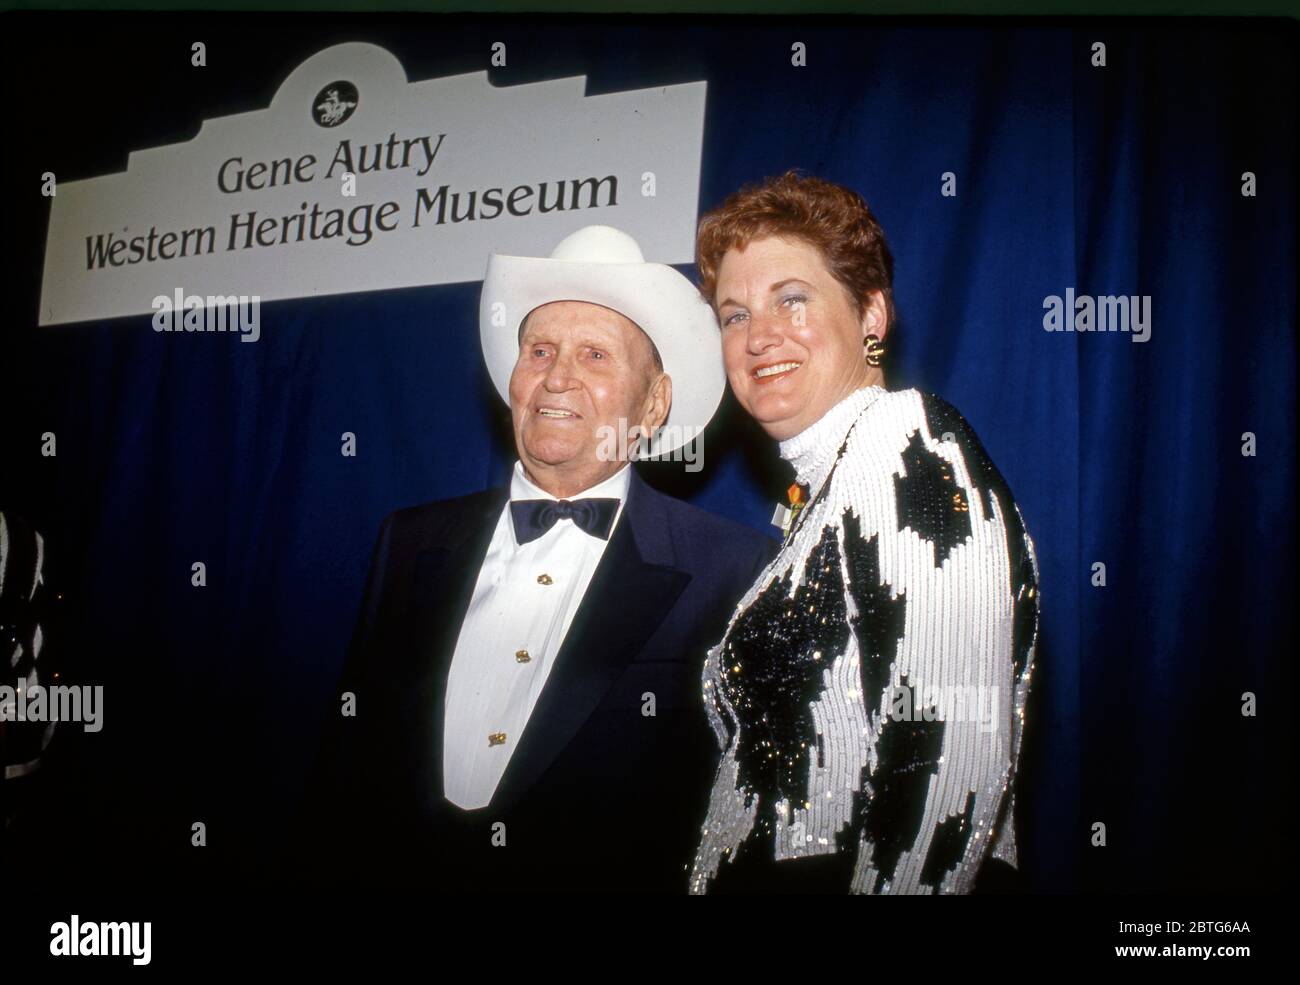 Gene and Jackie Autry at an event at the Gene Autry Western Heritage Museum in Los Angeles, CA Stock Photo